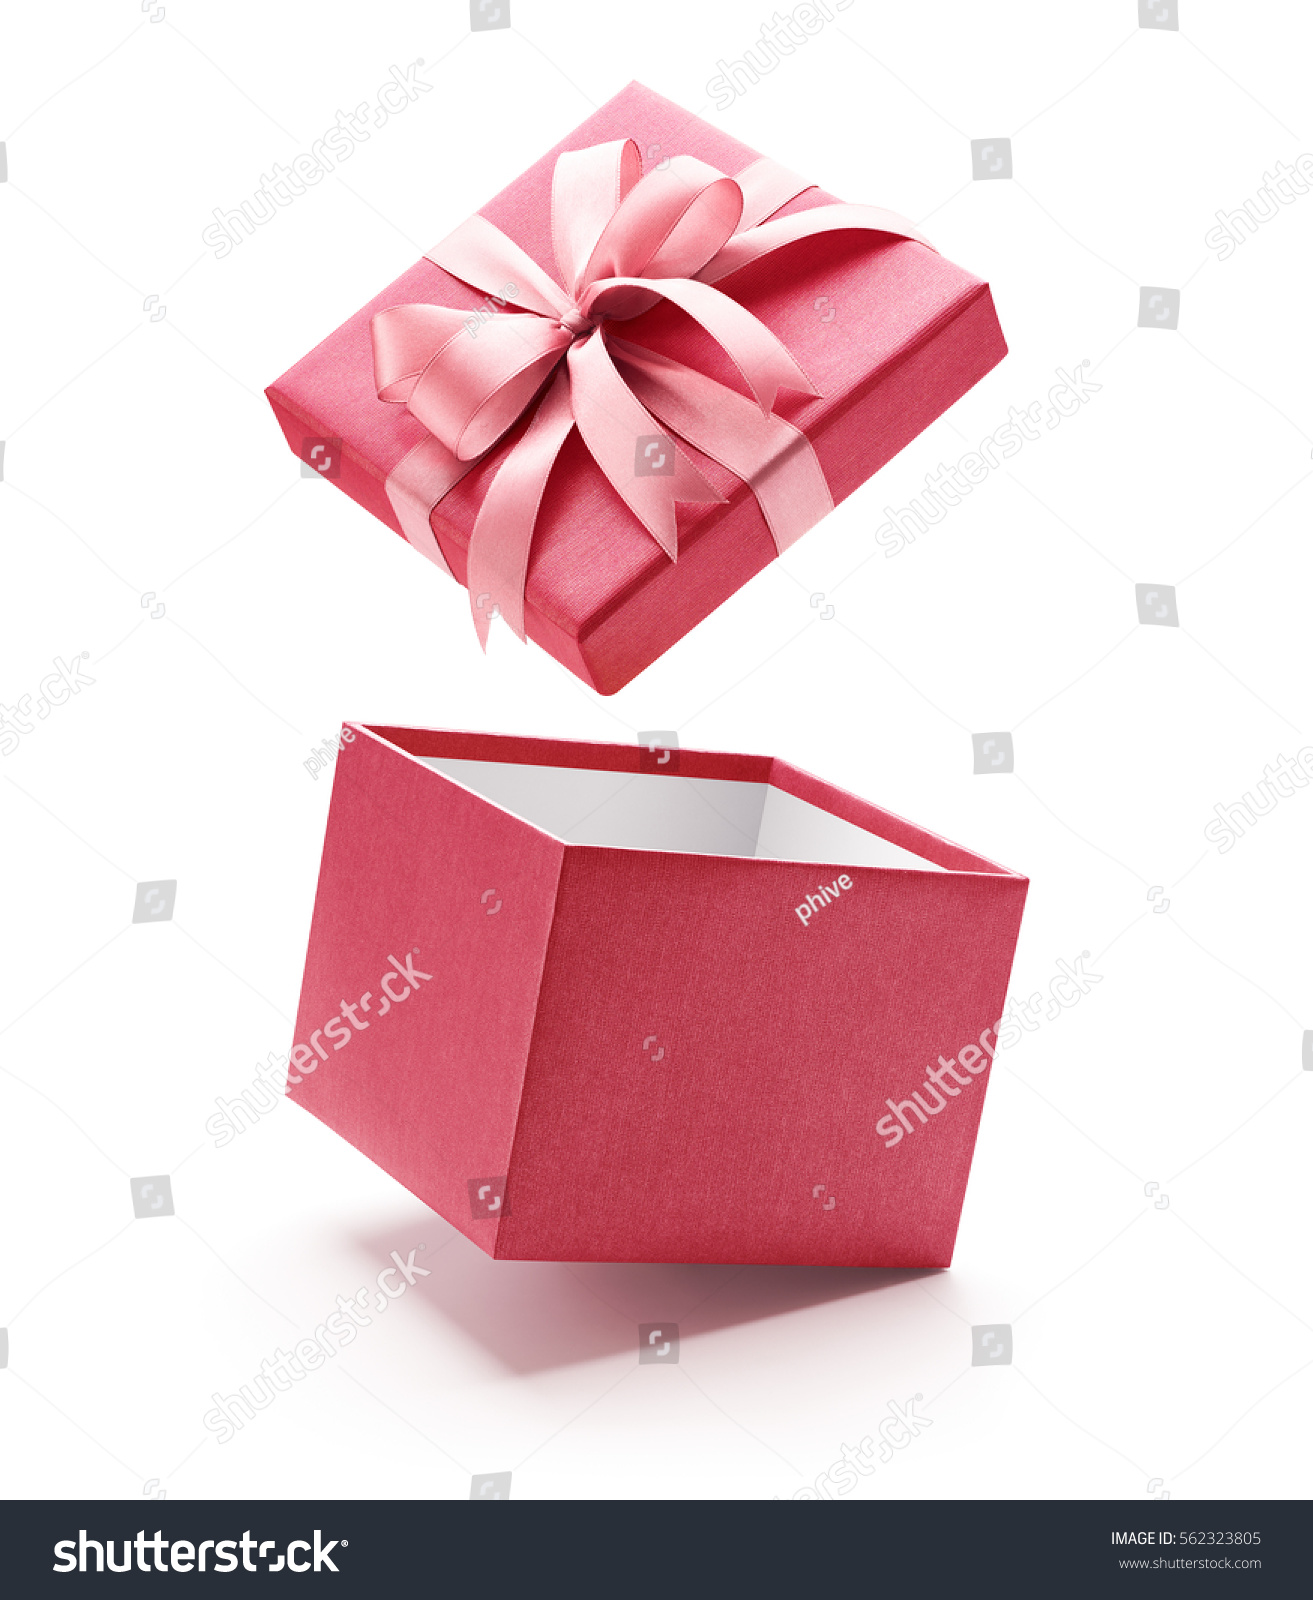 Pink open gift box isolated on white background  #562323805